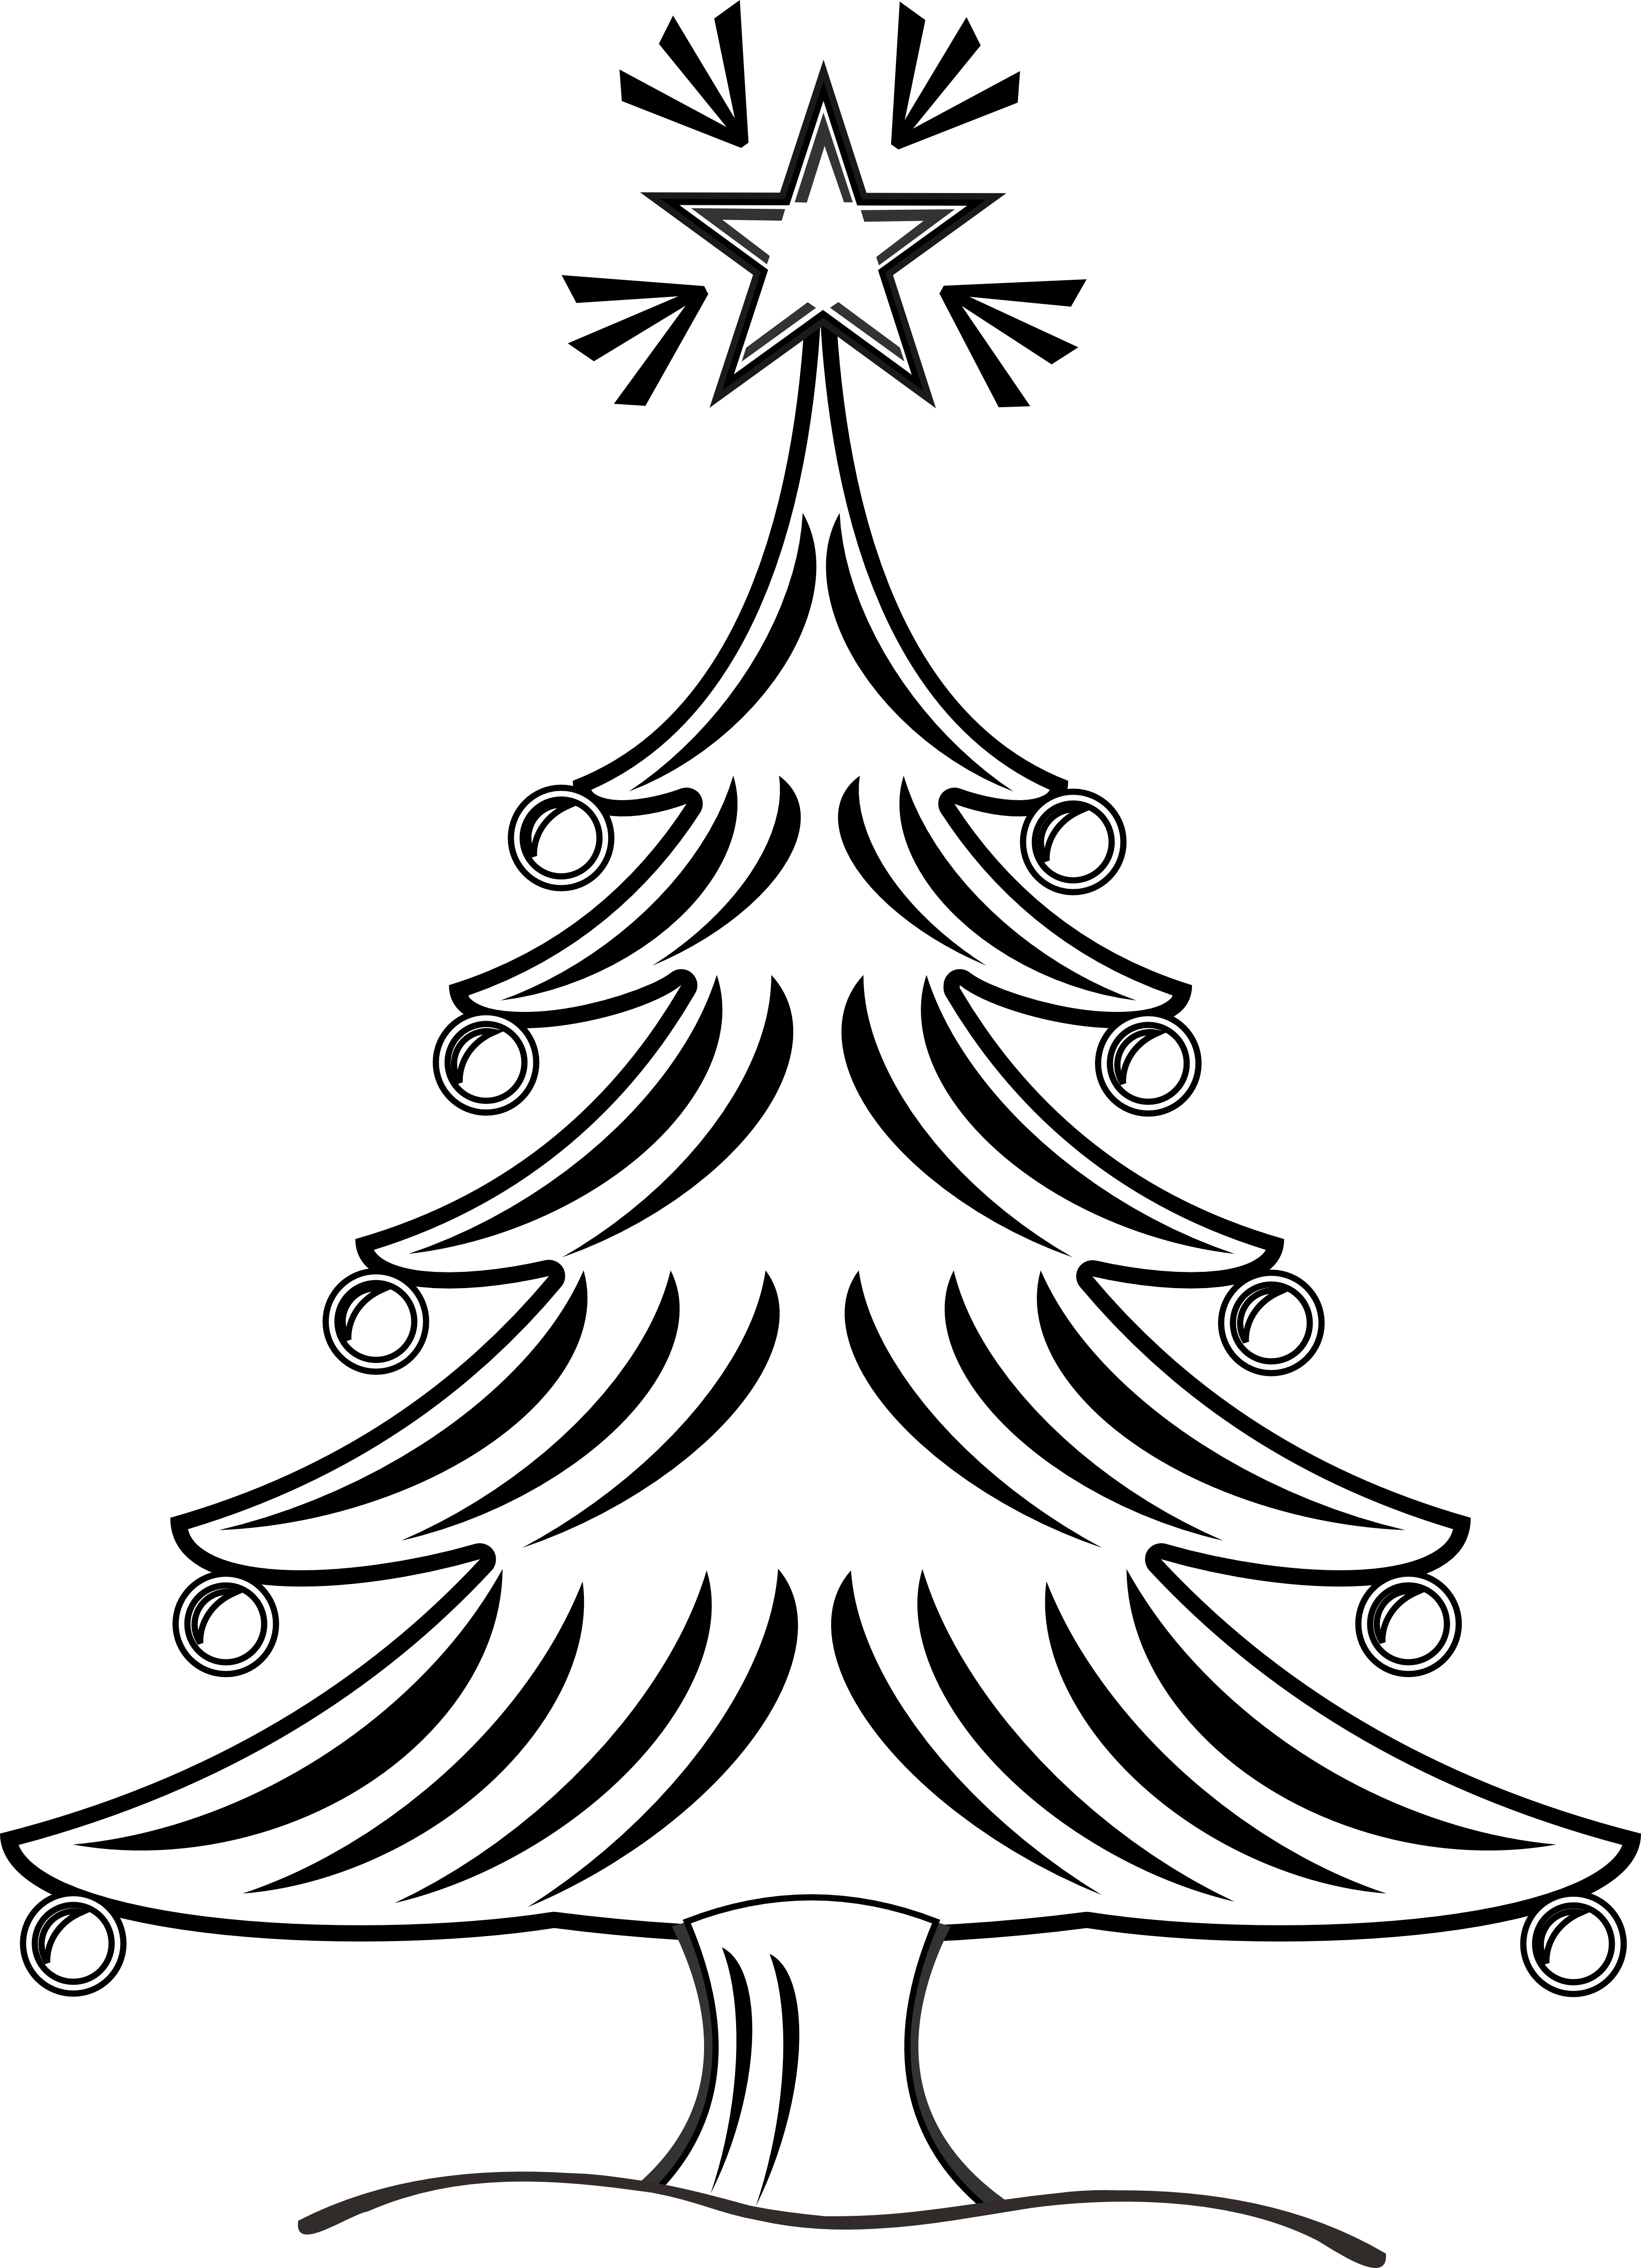 Black And White Christmas Tree Clip Art - ClipArt Best